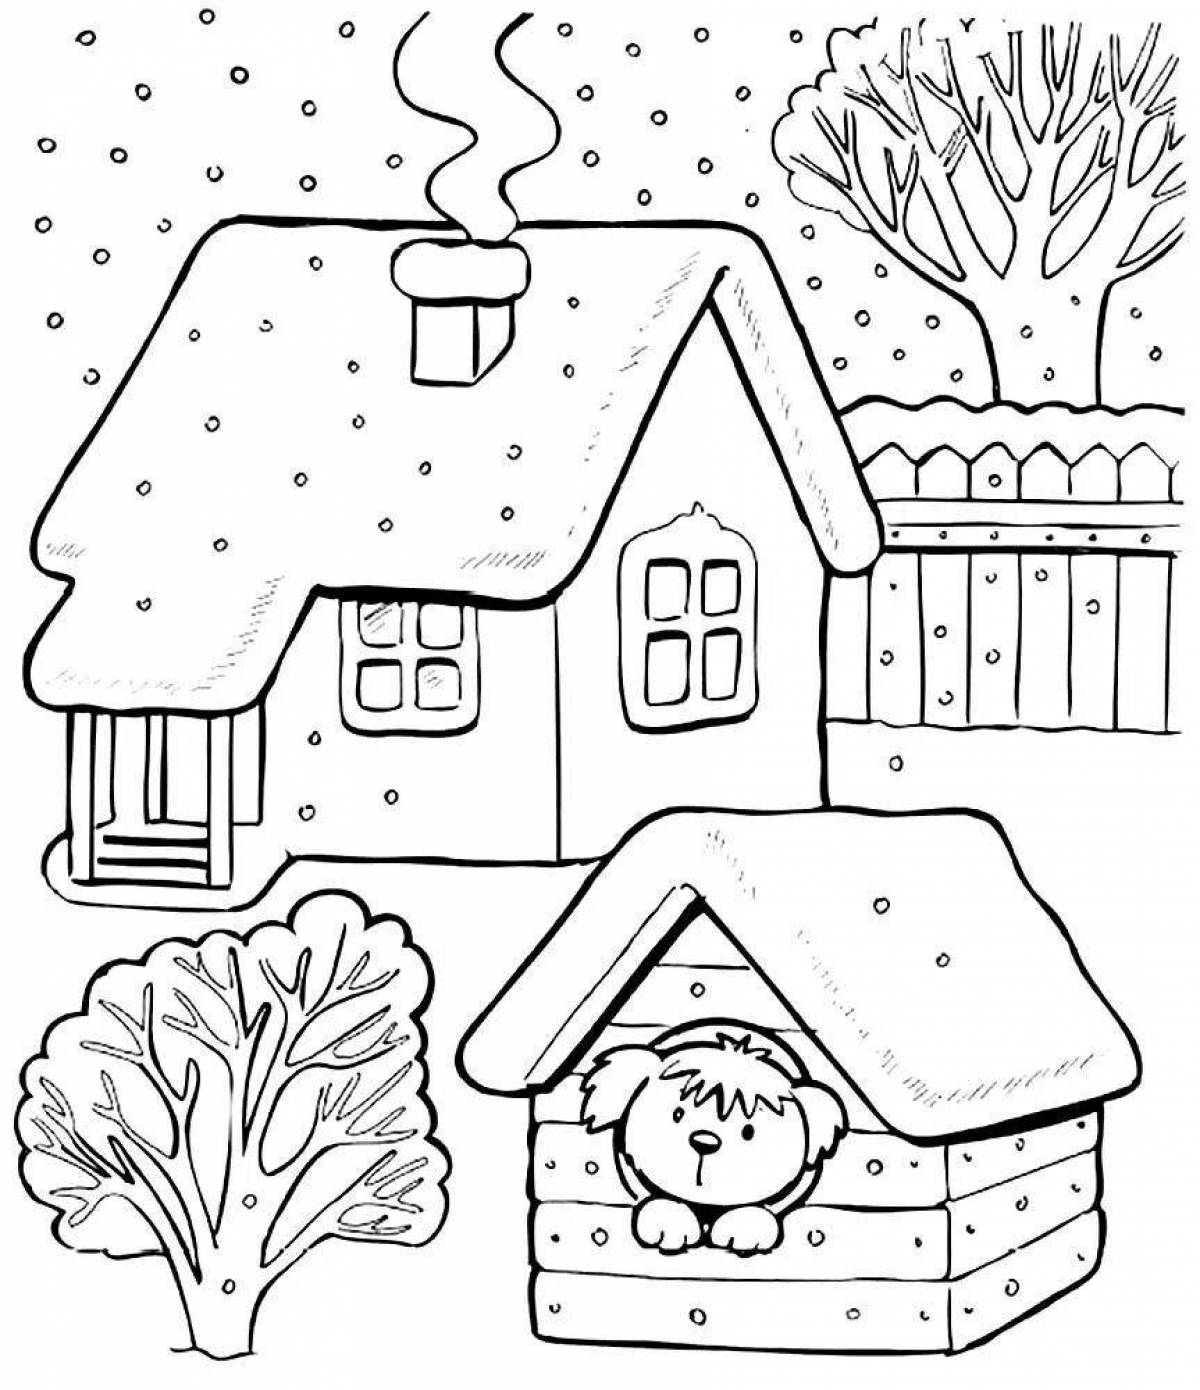 Colouring a cheerful village house for children